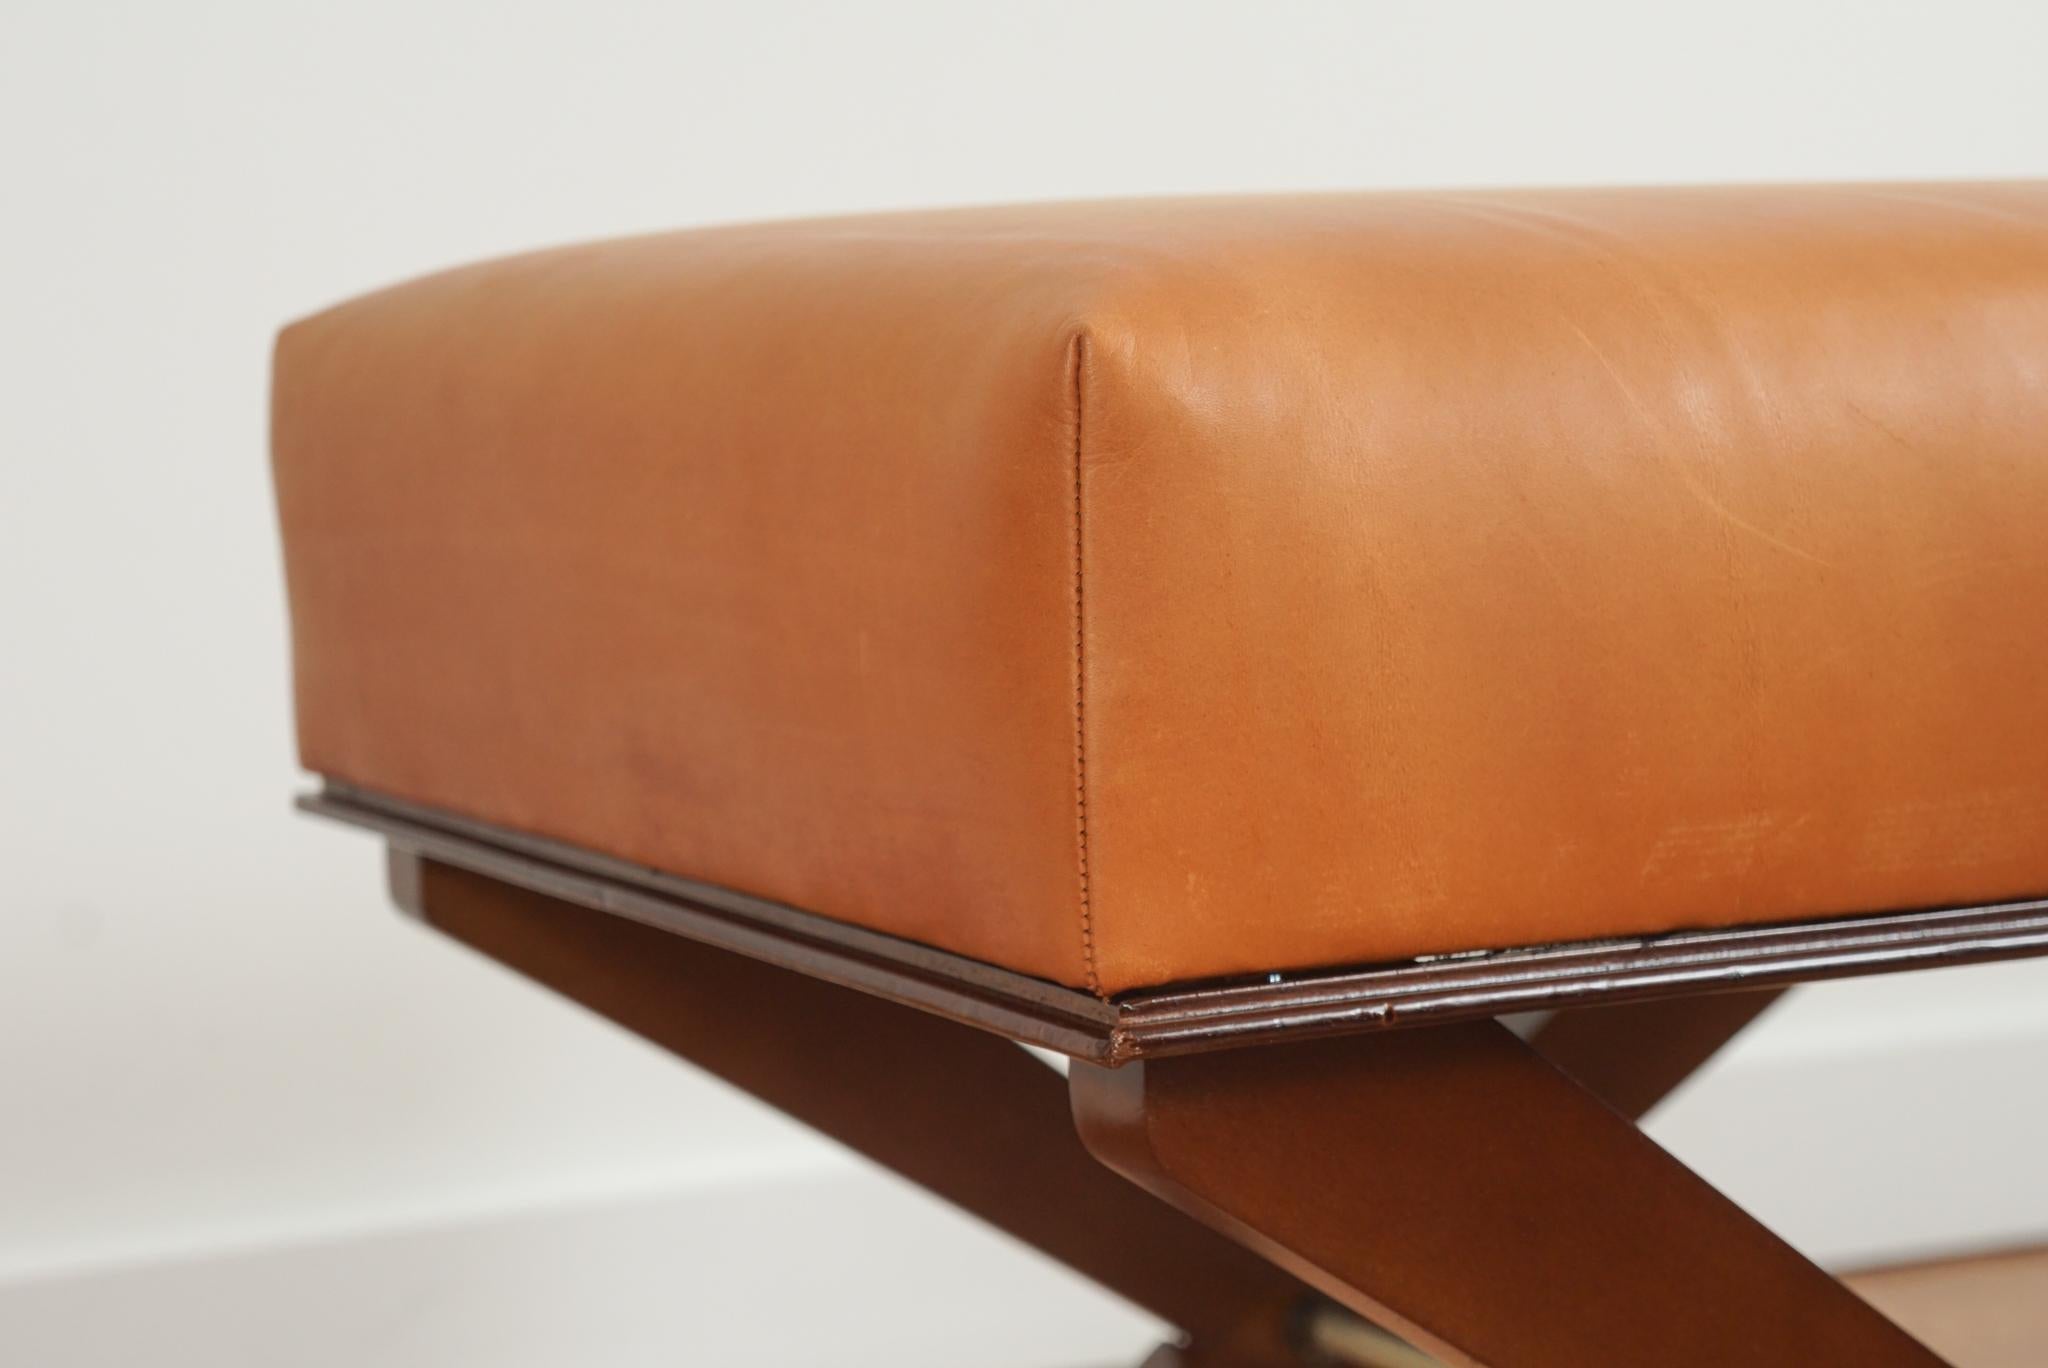 The vintage, classic X-base leather upholstered stool, shown here, is made in the style of French designer Andre Arbus.  Featuring a deep cushion top newly upholstered in Canyon leather, the graceful proportions of the X-base with make it a classic